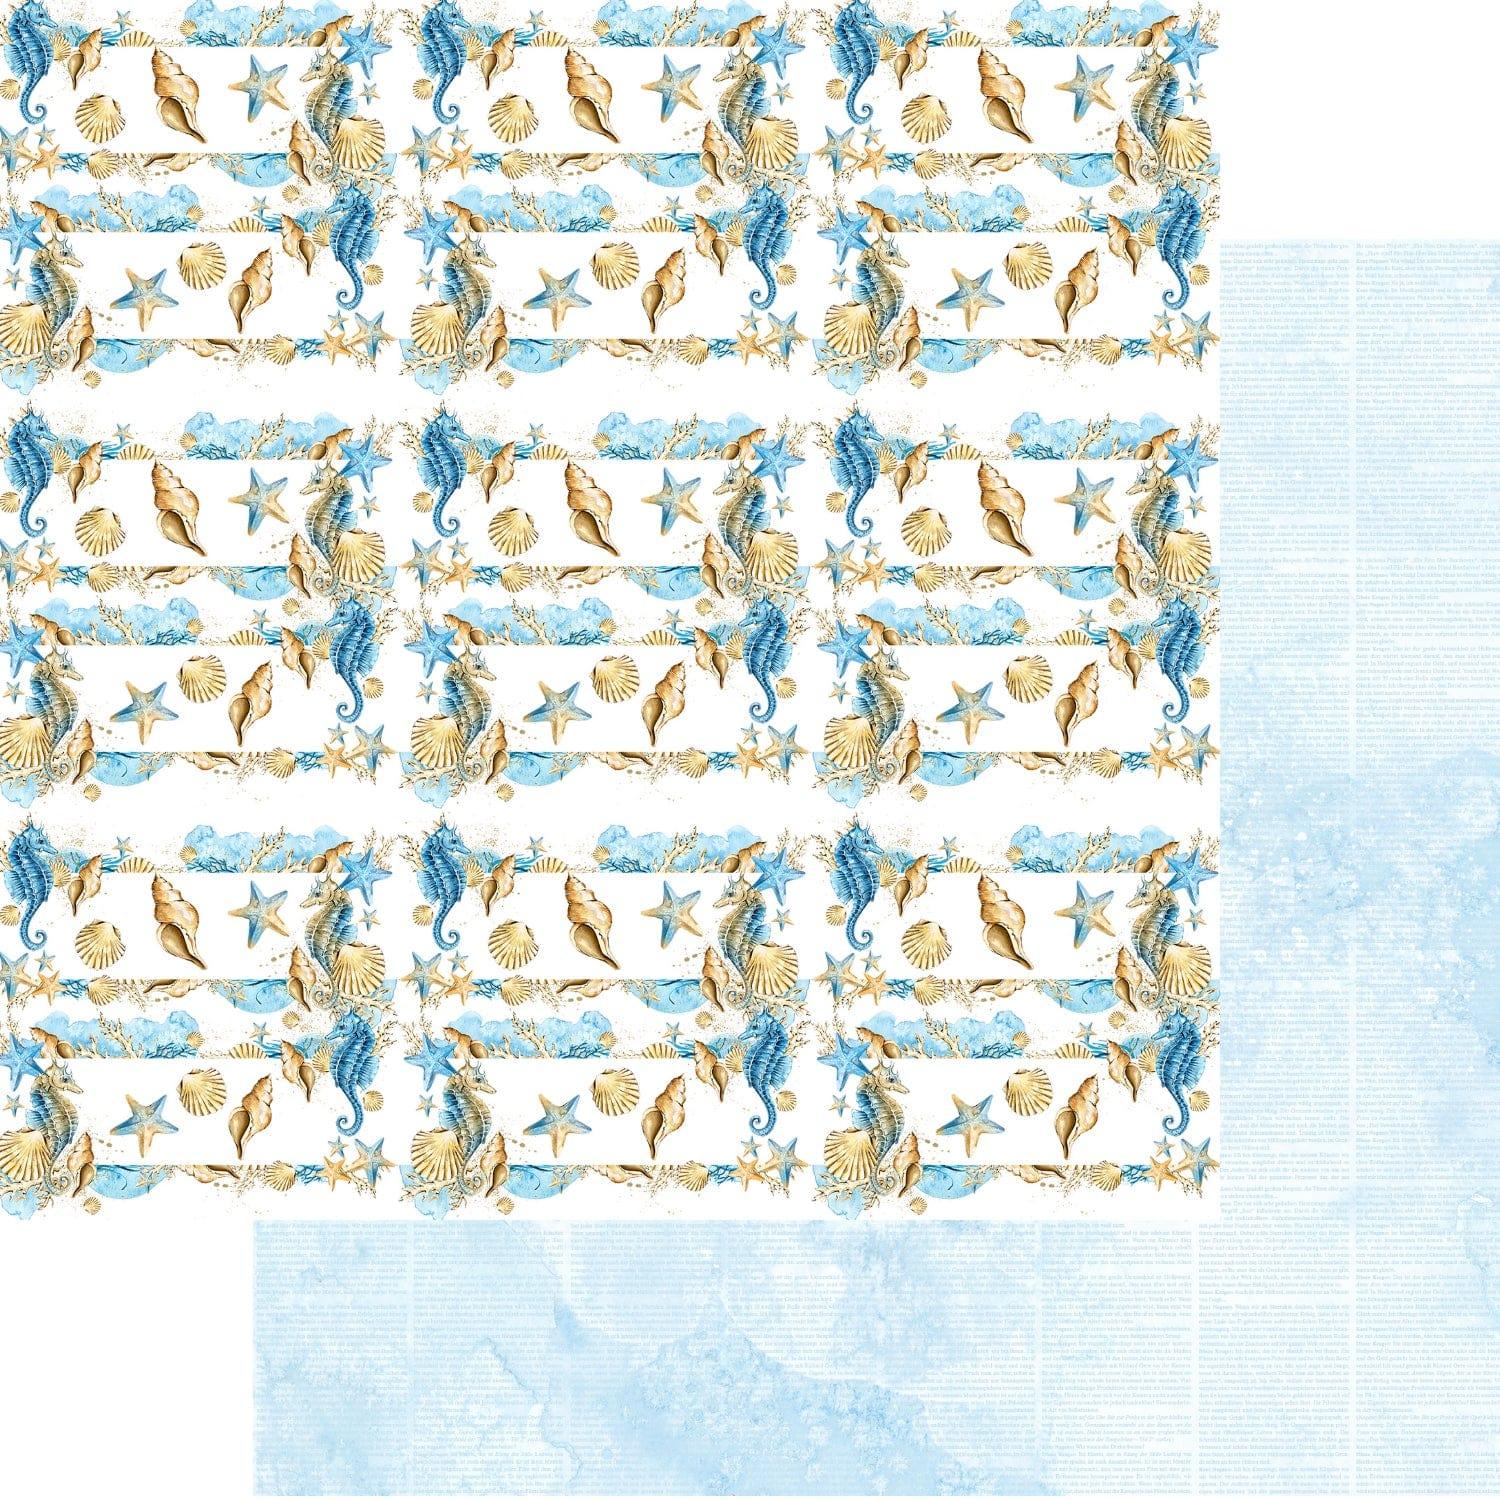 Frou Frou's Sun & Sand Collection Sea Shells In a Row 12 x 12 Double-Sided Scrapbook Paper by SSC Designs - Scrapbook Supply Companies